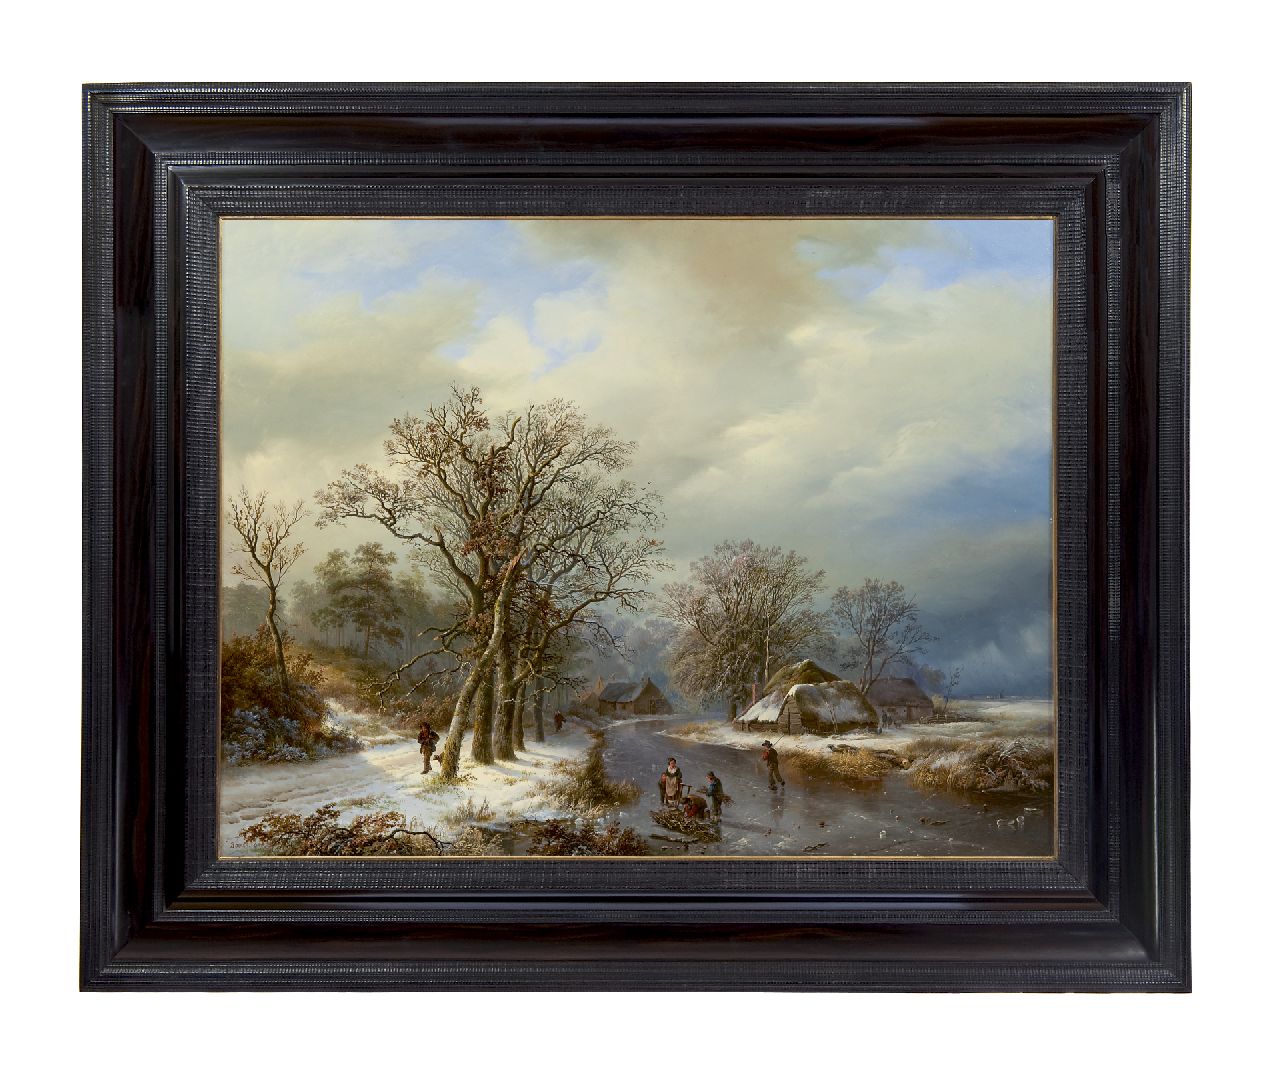 Bodeman W.  | Willem Bodeman, A winter landscape with skaters and farmers gathering wood, oil on panel 58.0 x 75.4 cm, signed l.l.